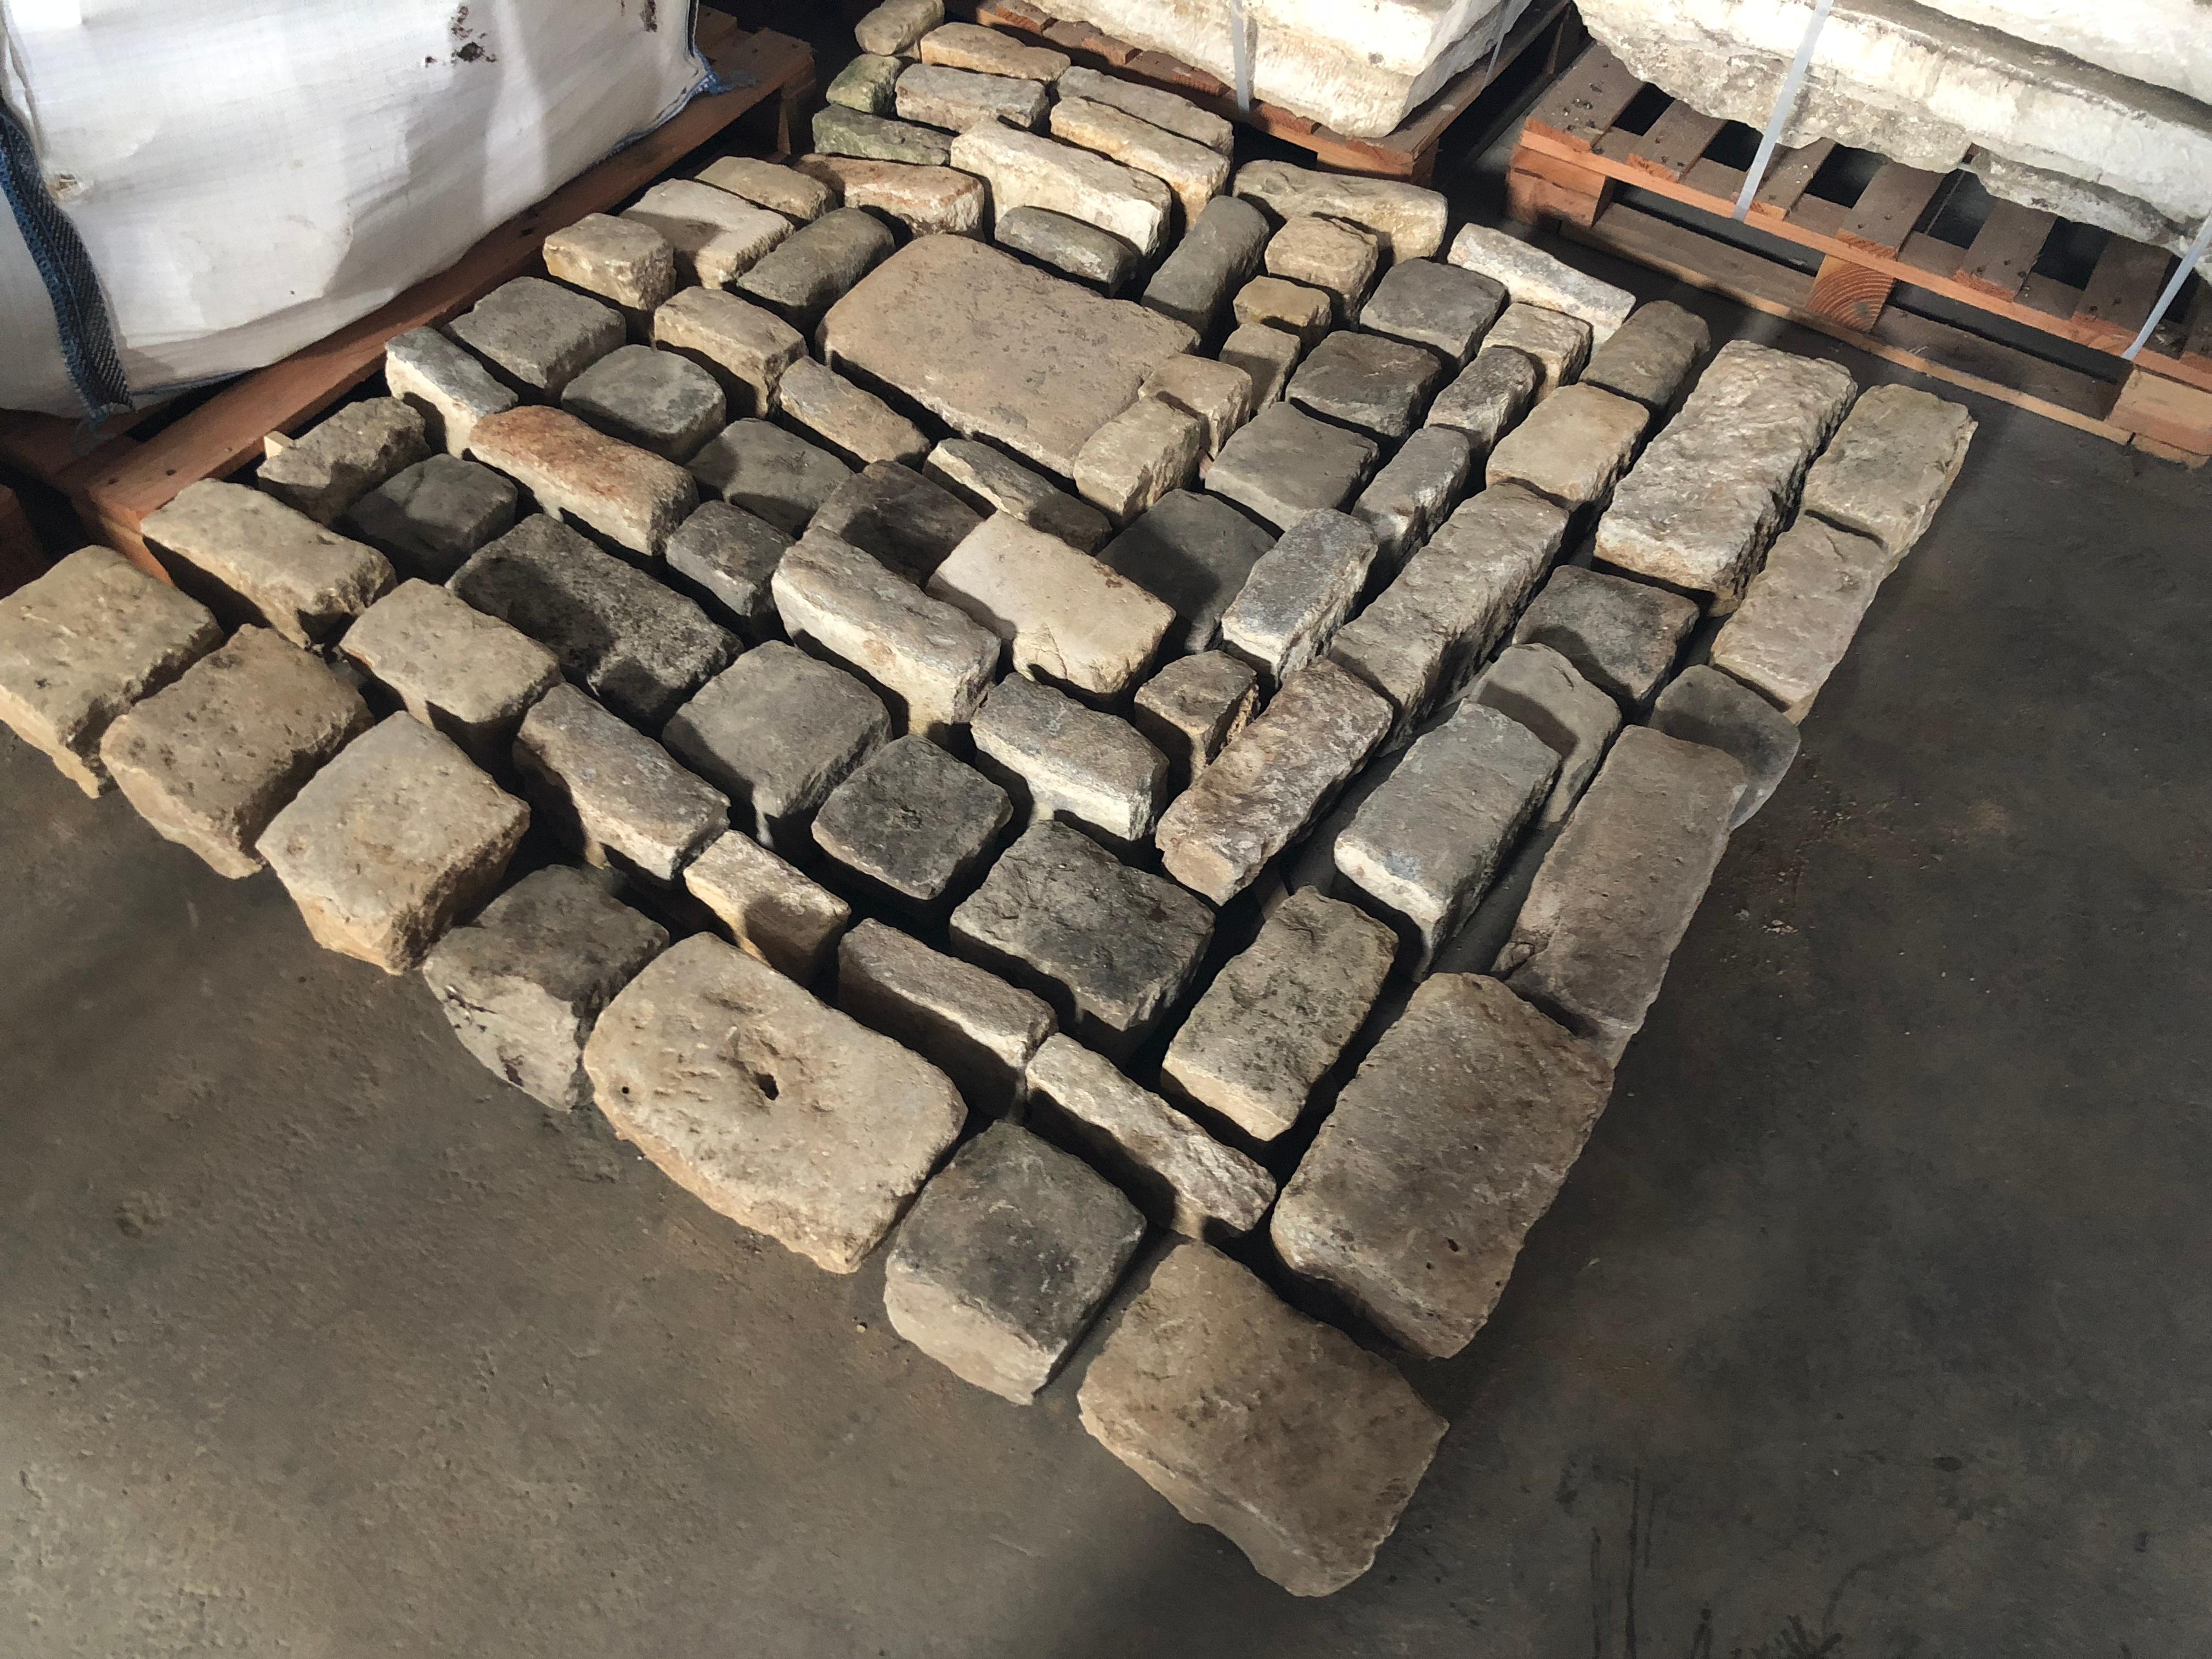 Original and authentic solid French antique solid cobble stone from the 17th century in France. Paris area. Great condition, rare and unique. Price is per square foot.
Possible to use for drive way, flooring and surround floor fountain.
More info on